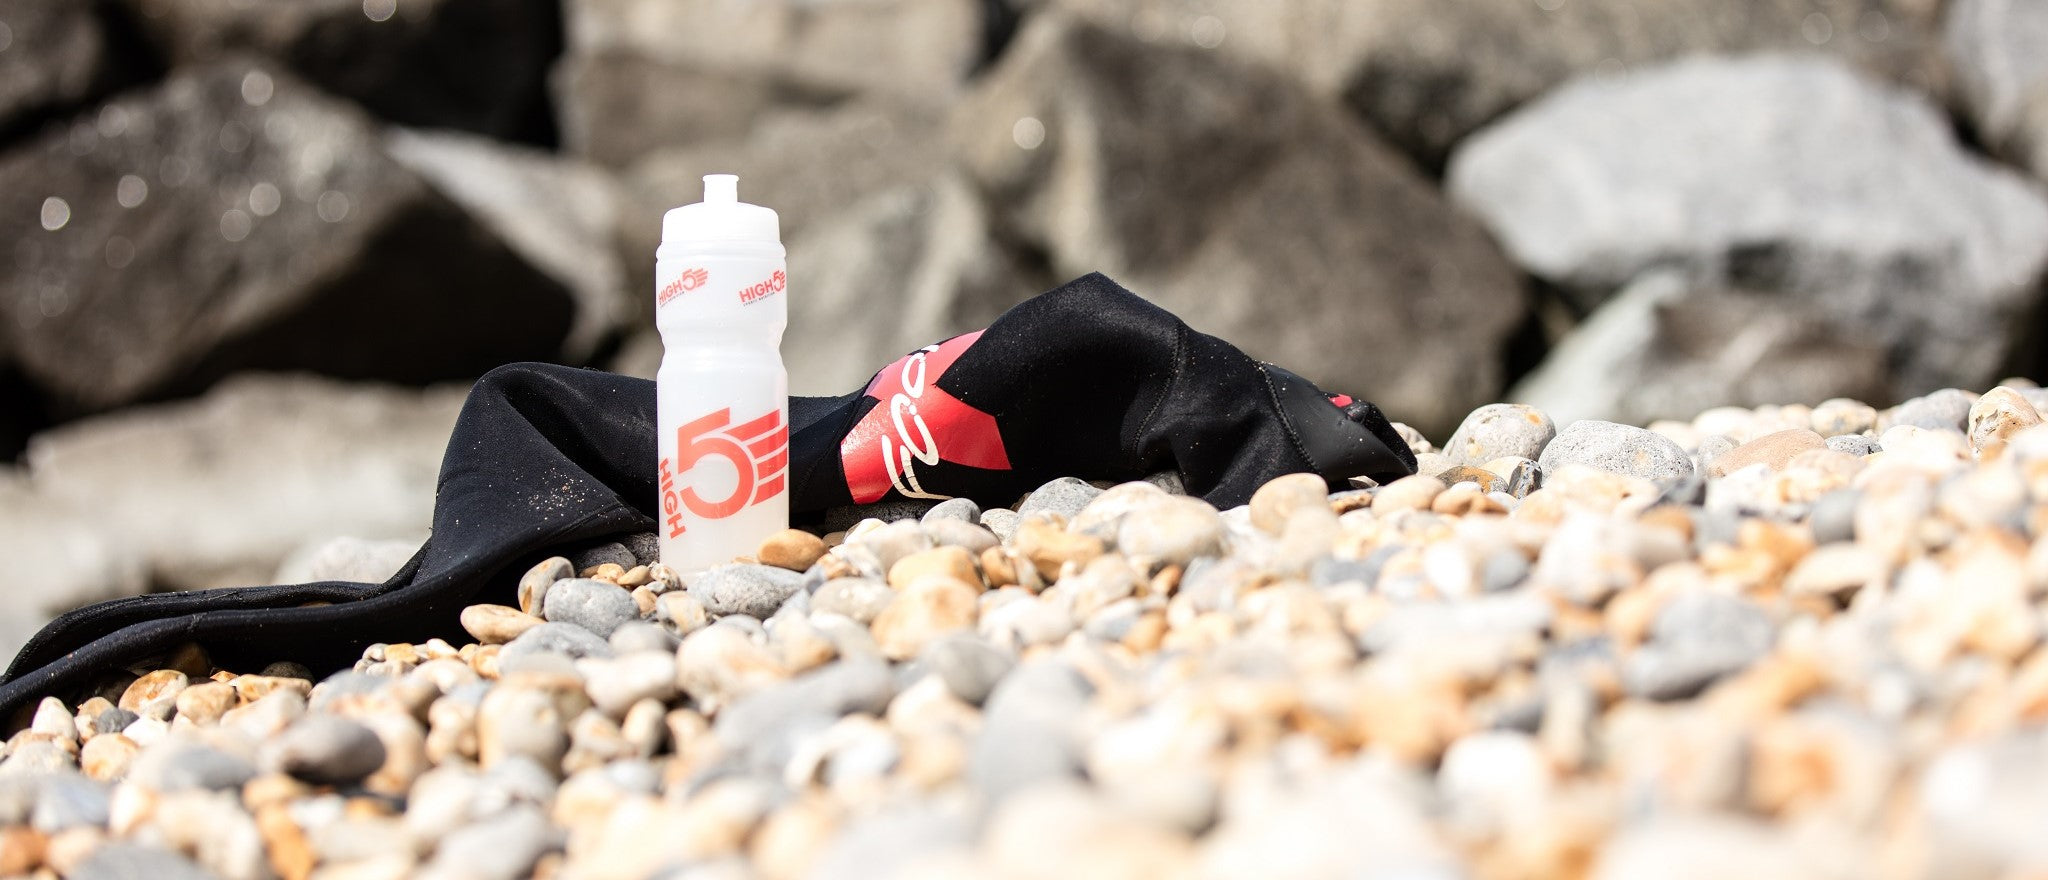 Wetsuit and HIGH5 bottle